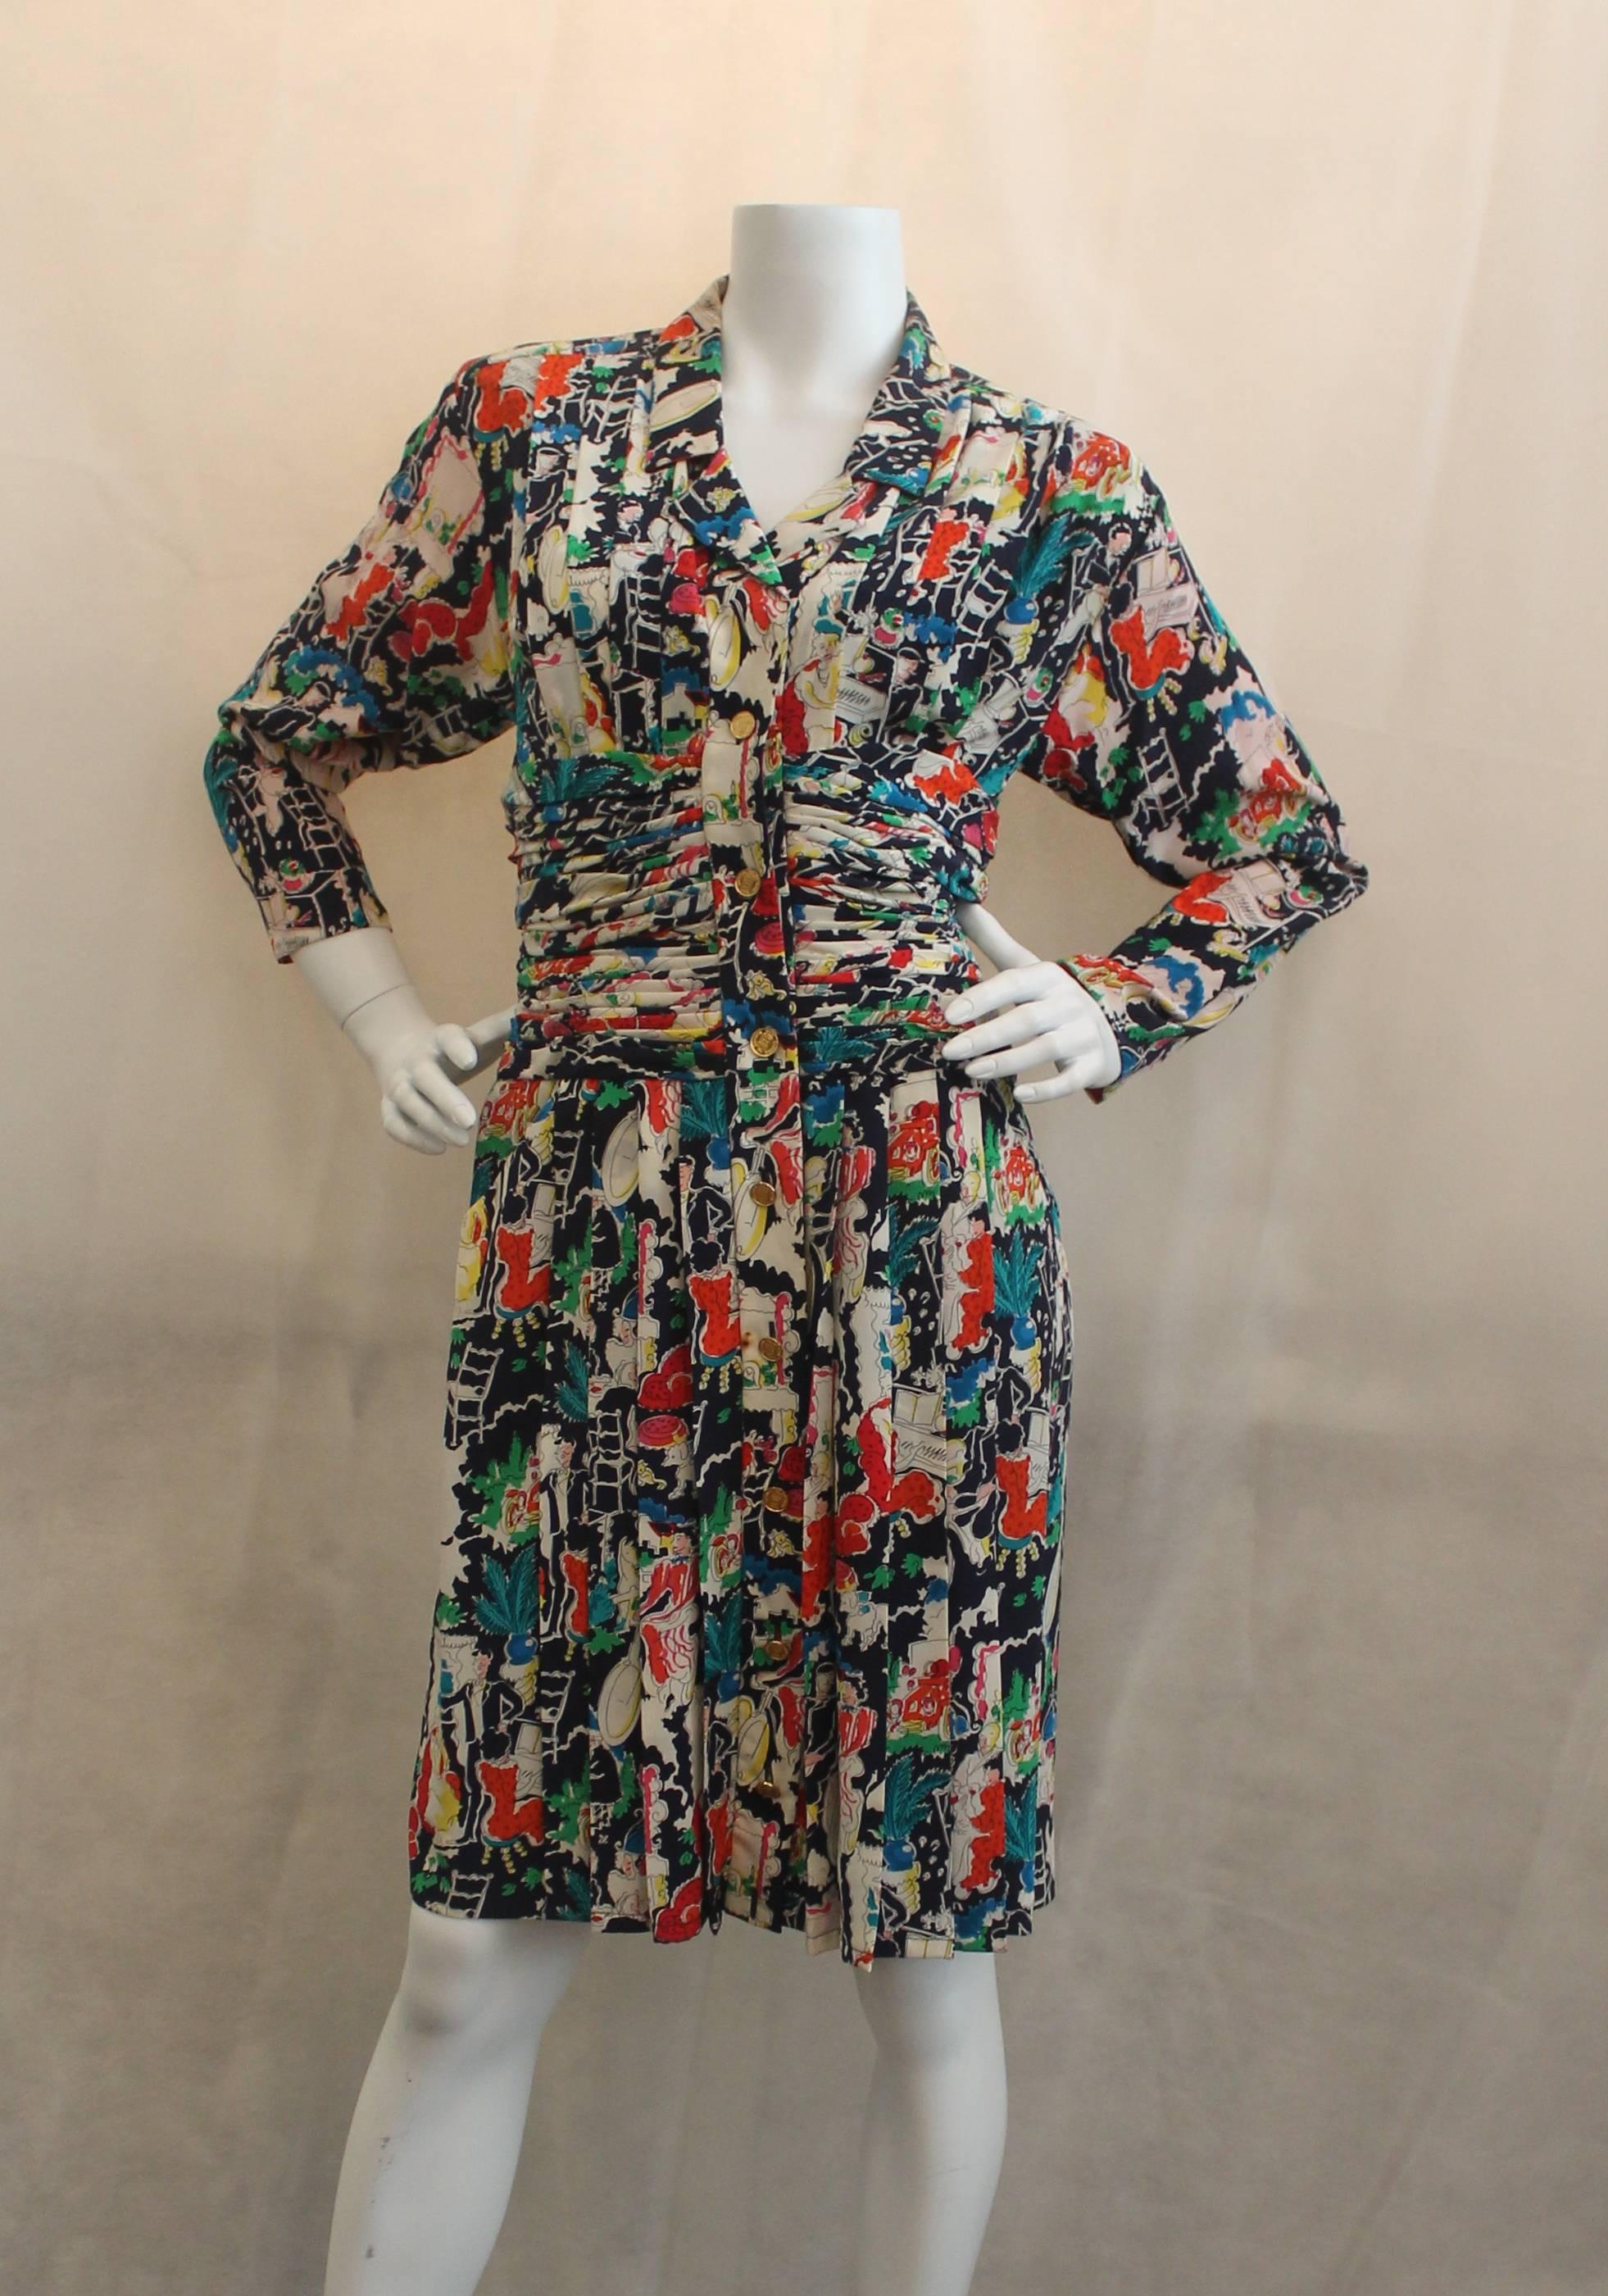 Chanel Multi-color Silk Printed Dress & Coat Set - 42 - circa 1980's. This set is in good vintage condition with the main issue being a few small stains on the dress  and a couple on the jacket which are not noticeable unless examined closely. One